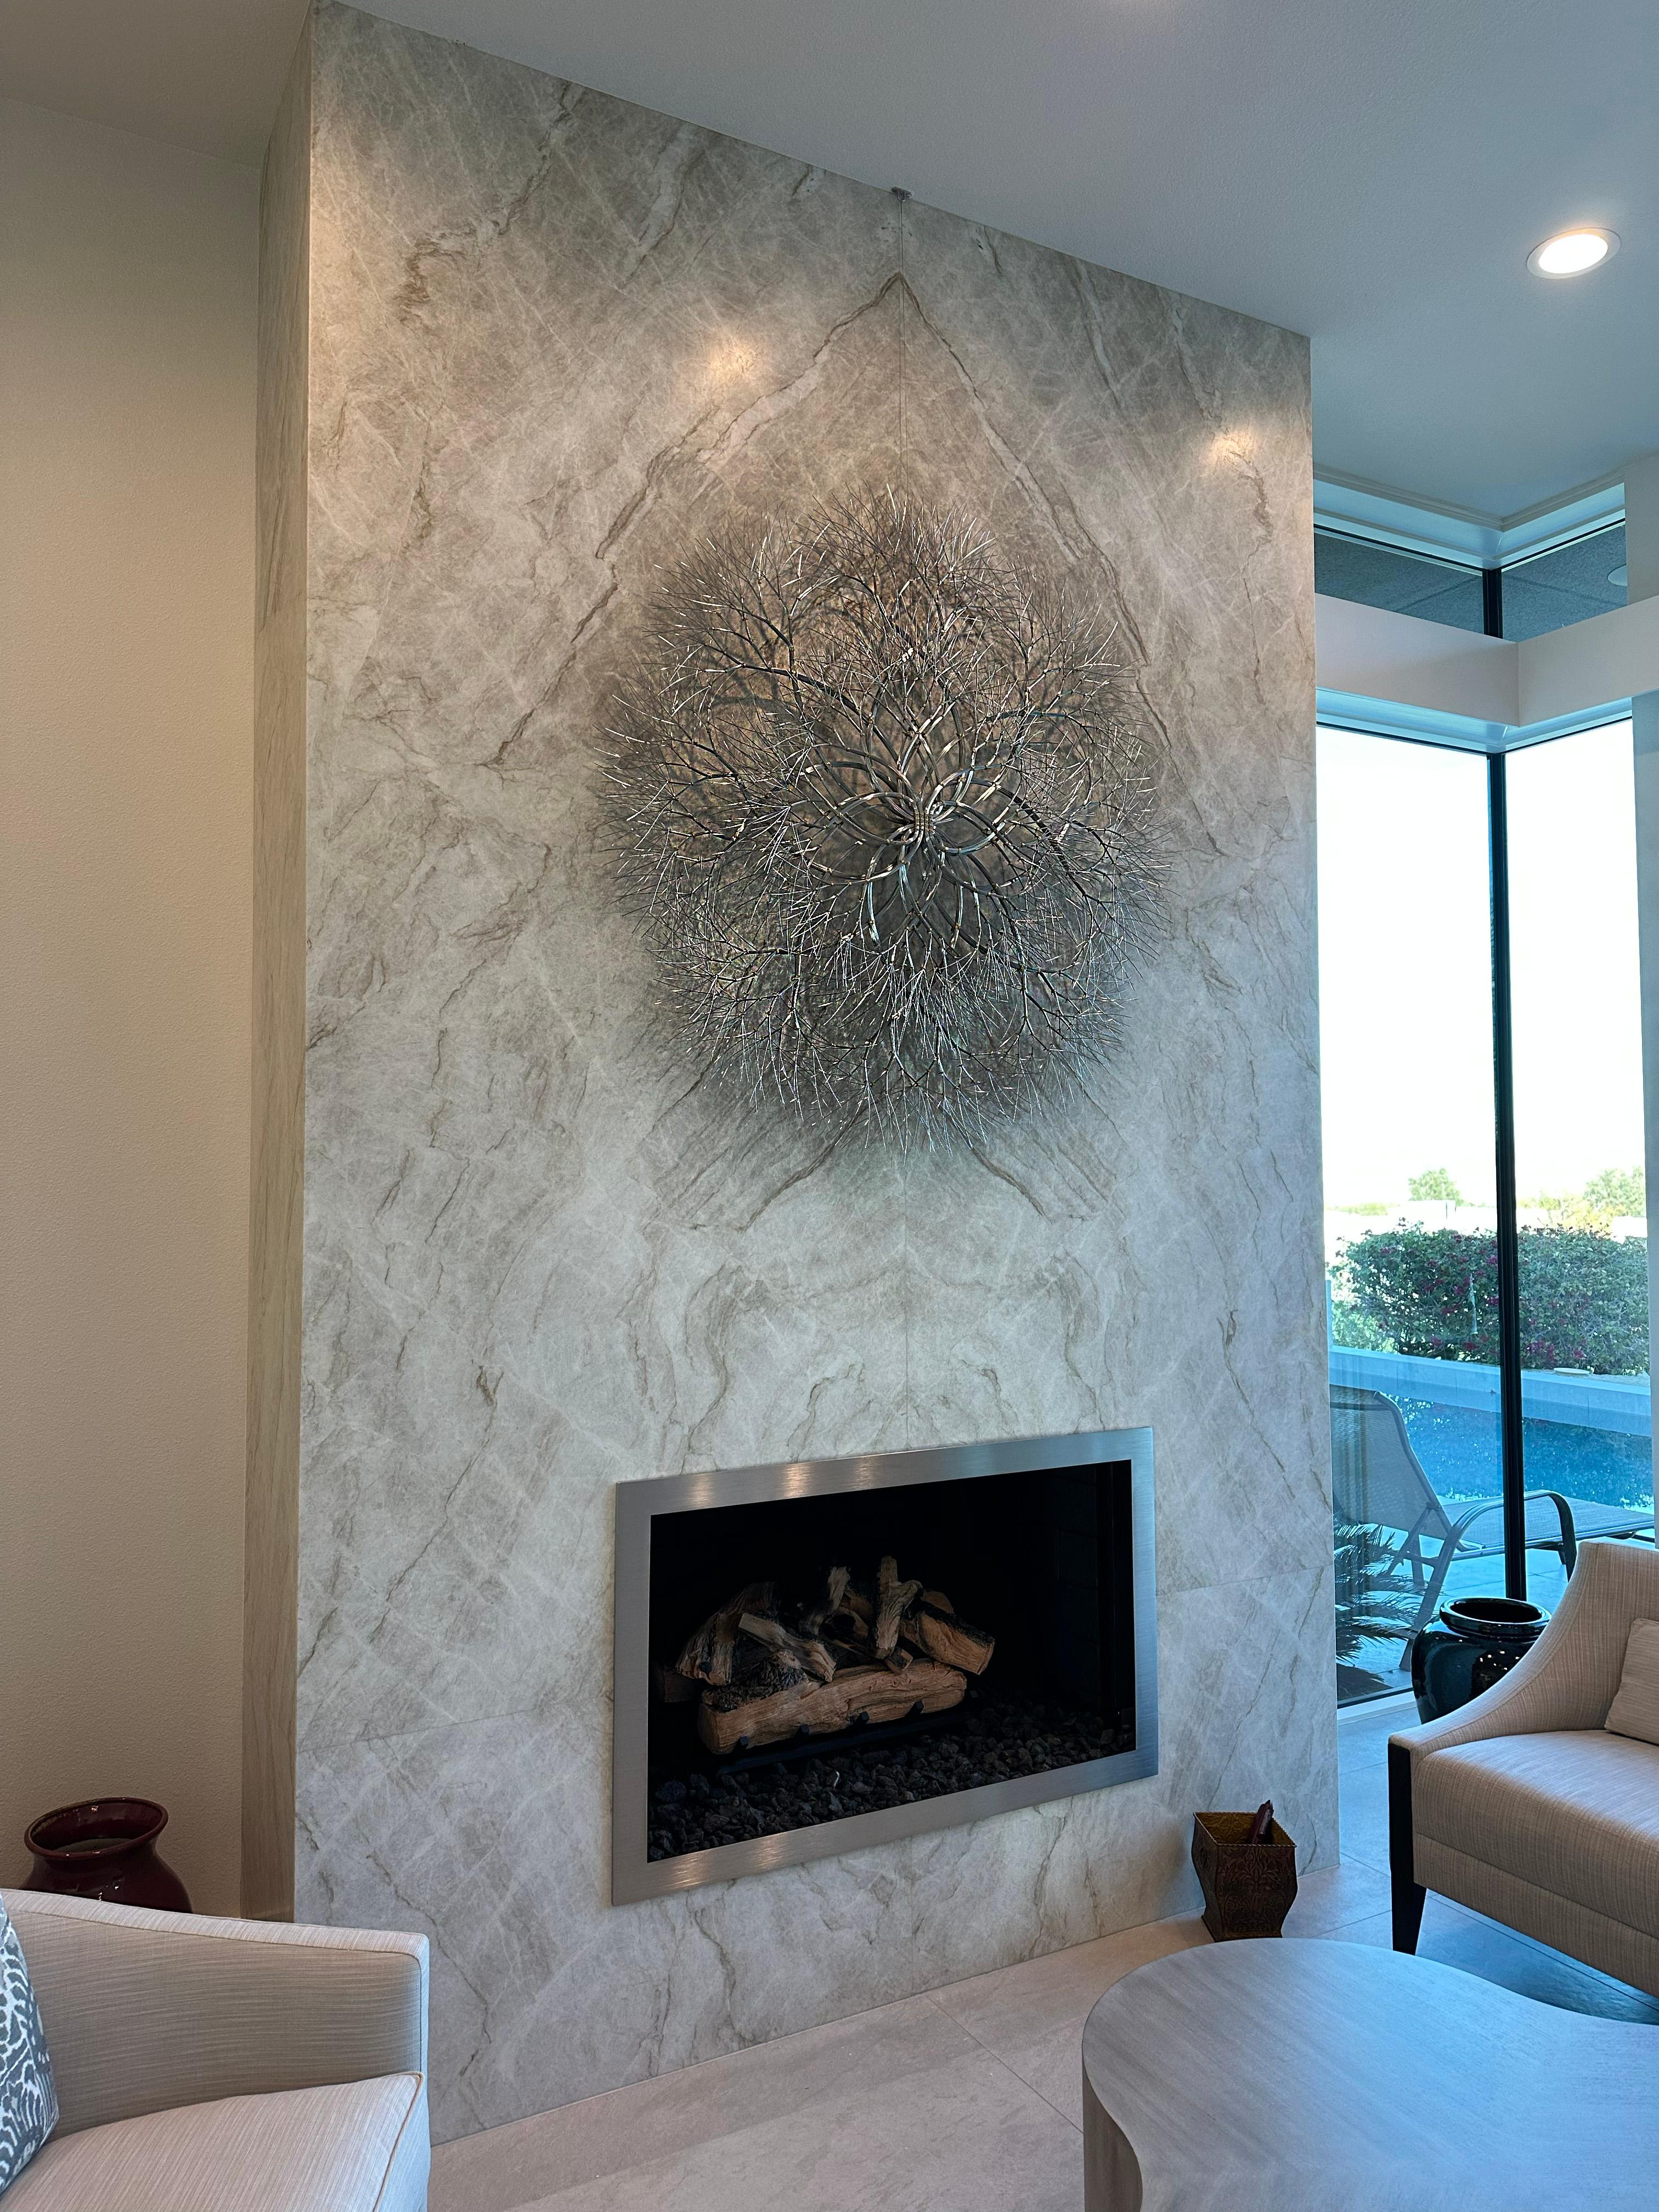 Stainless steel. 

Kue King created this elongated wall mounted sculpture using stainless steel wire. The polished stainless steel gives the sculpture a shine, reflectivity, and mirrored finish that adds sparkle to the room and picks up on colors